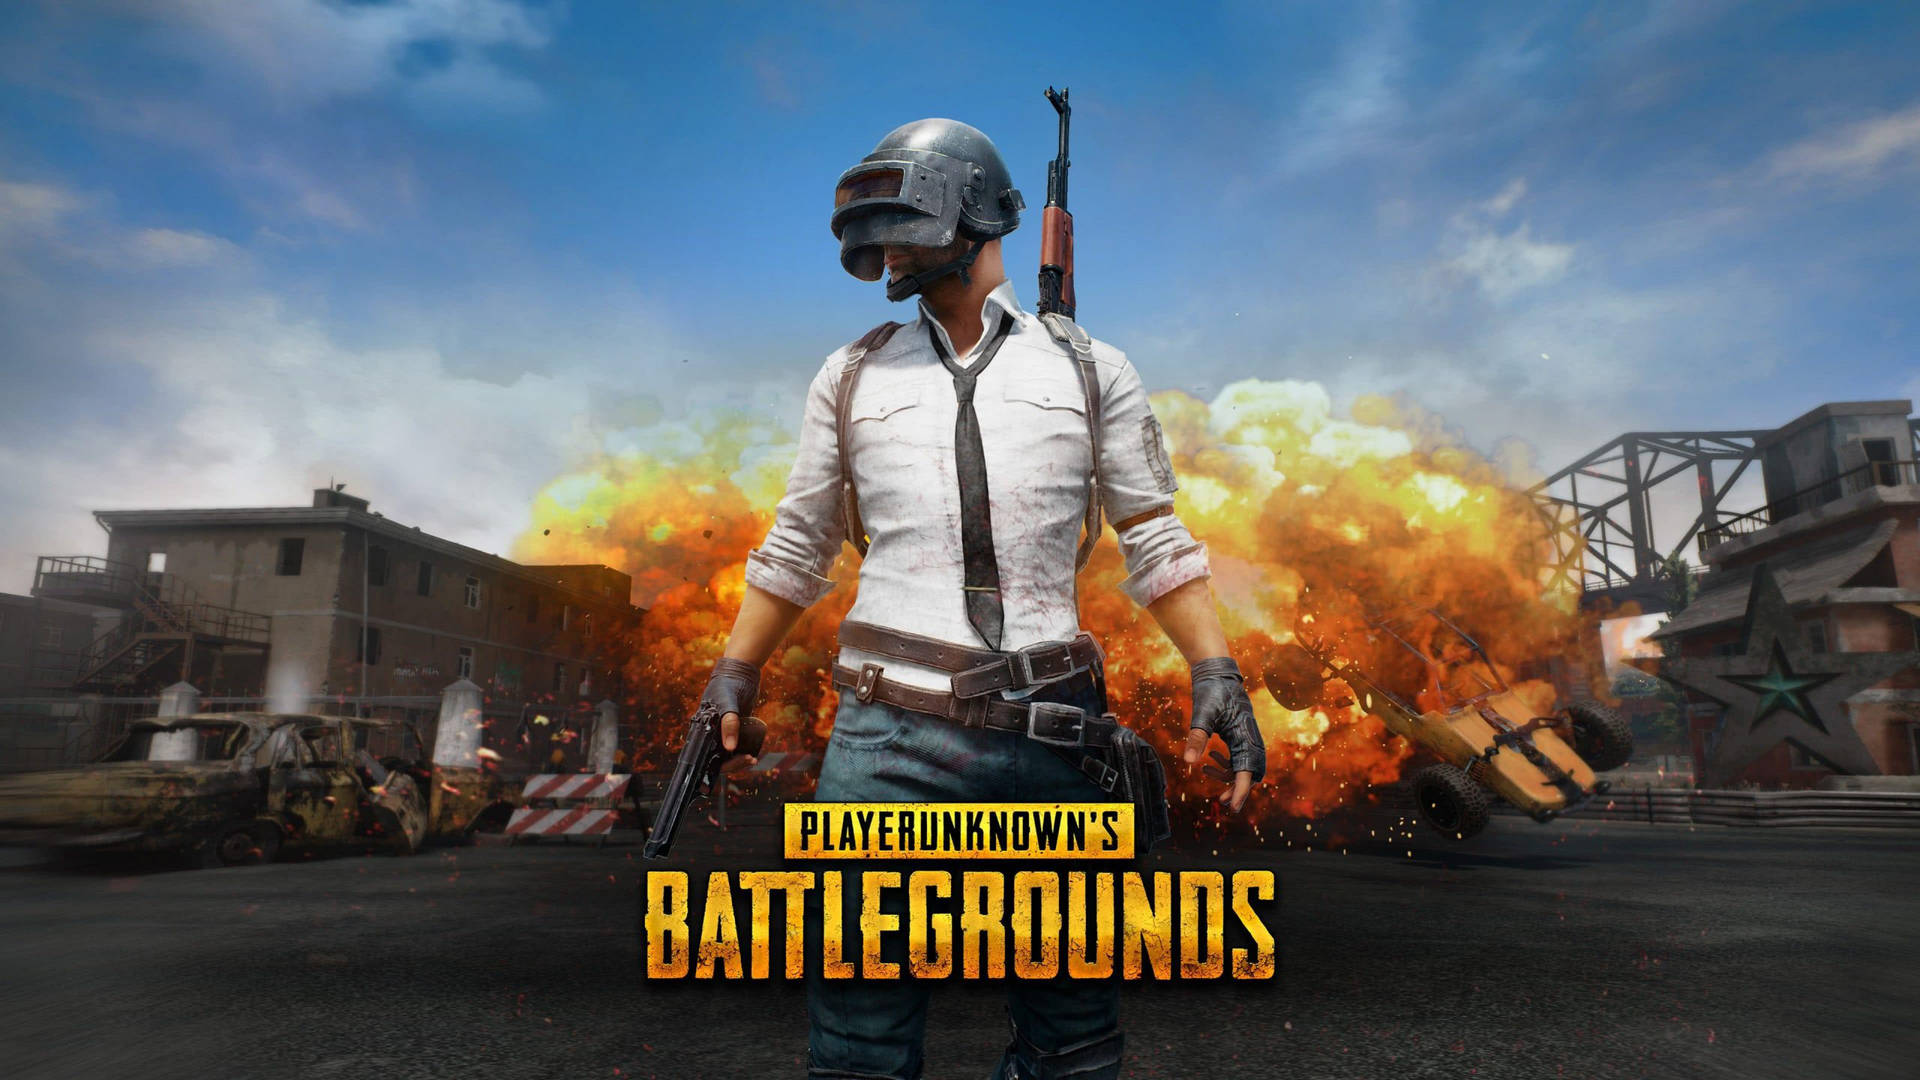 Free Pubg Wallpaper Downloads, [600+] Pubg Wallpapers for FREE | Wallpapers .com